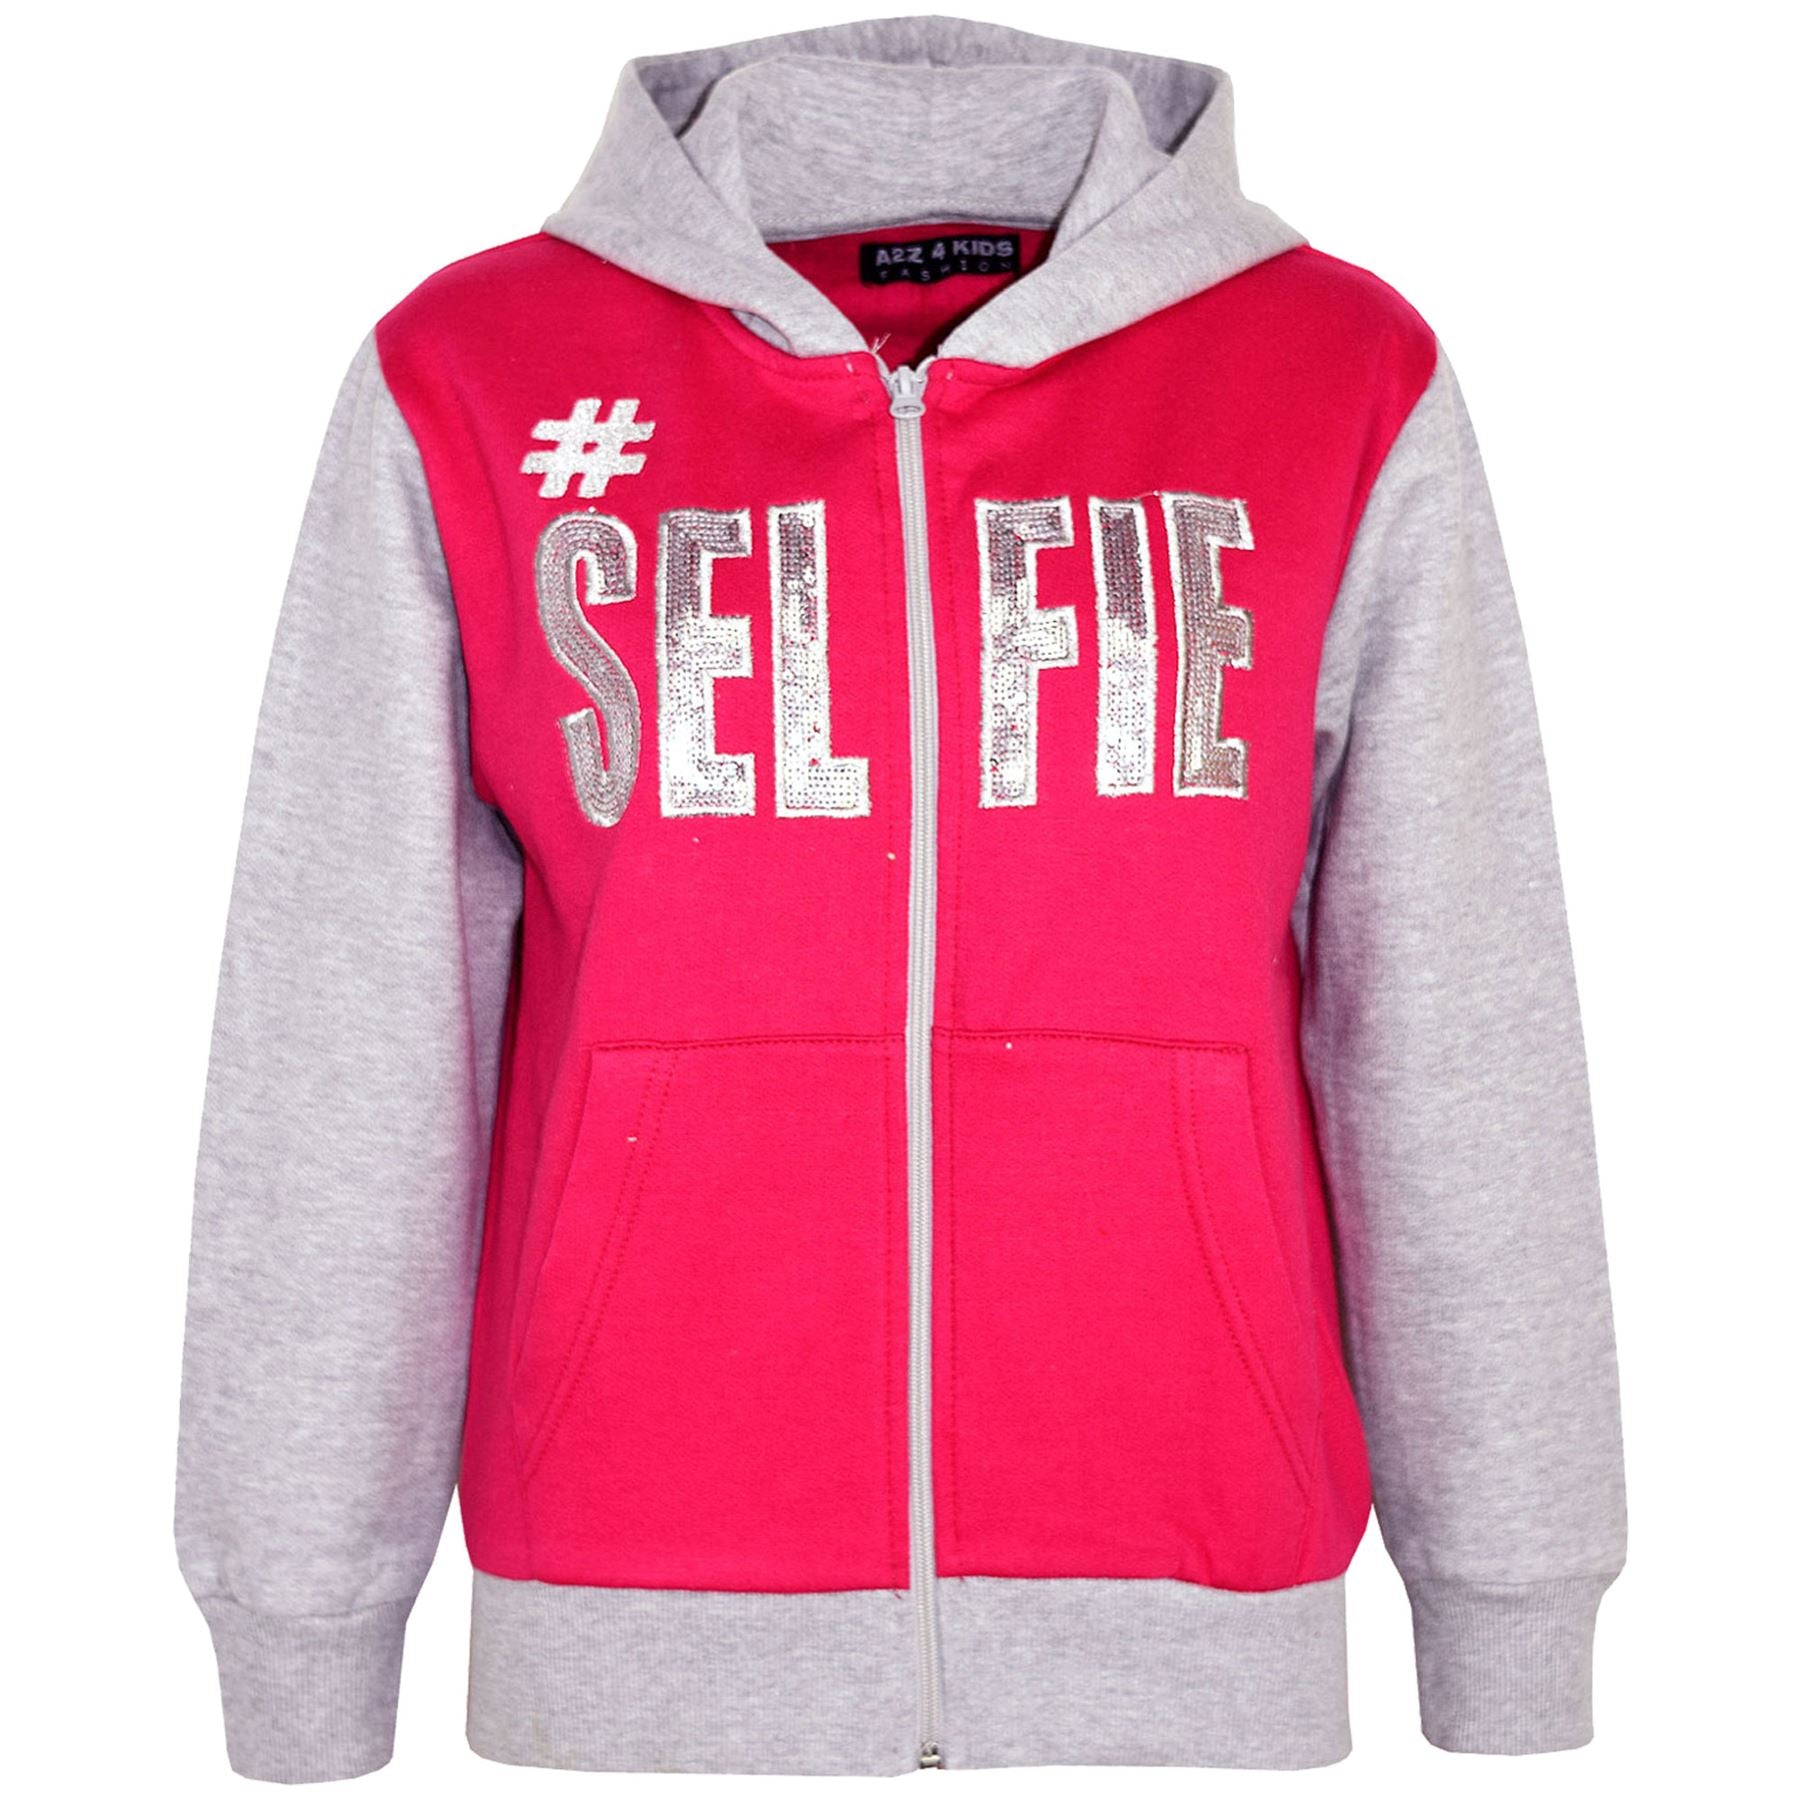 Girls #SELFIE Sequin Embroidered Pink & Grey Tracksuit